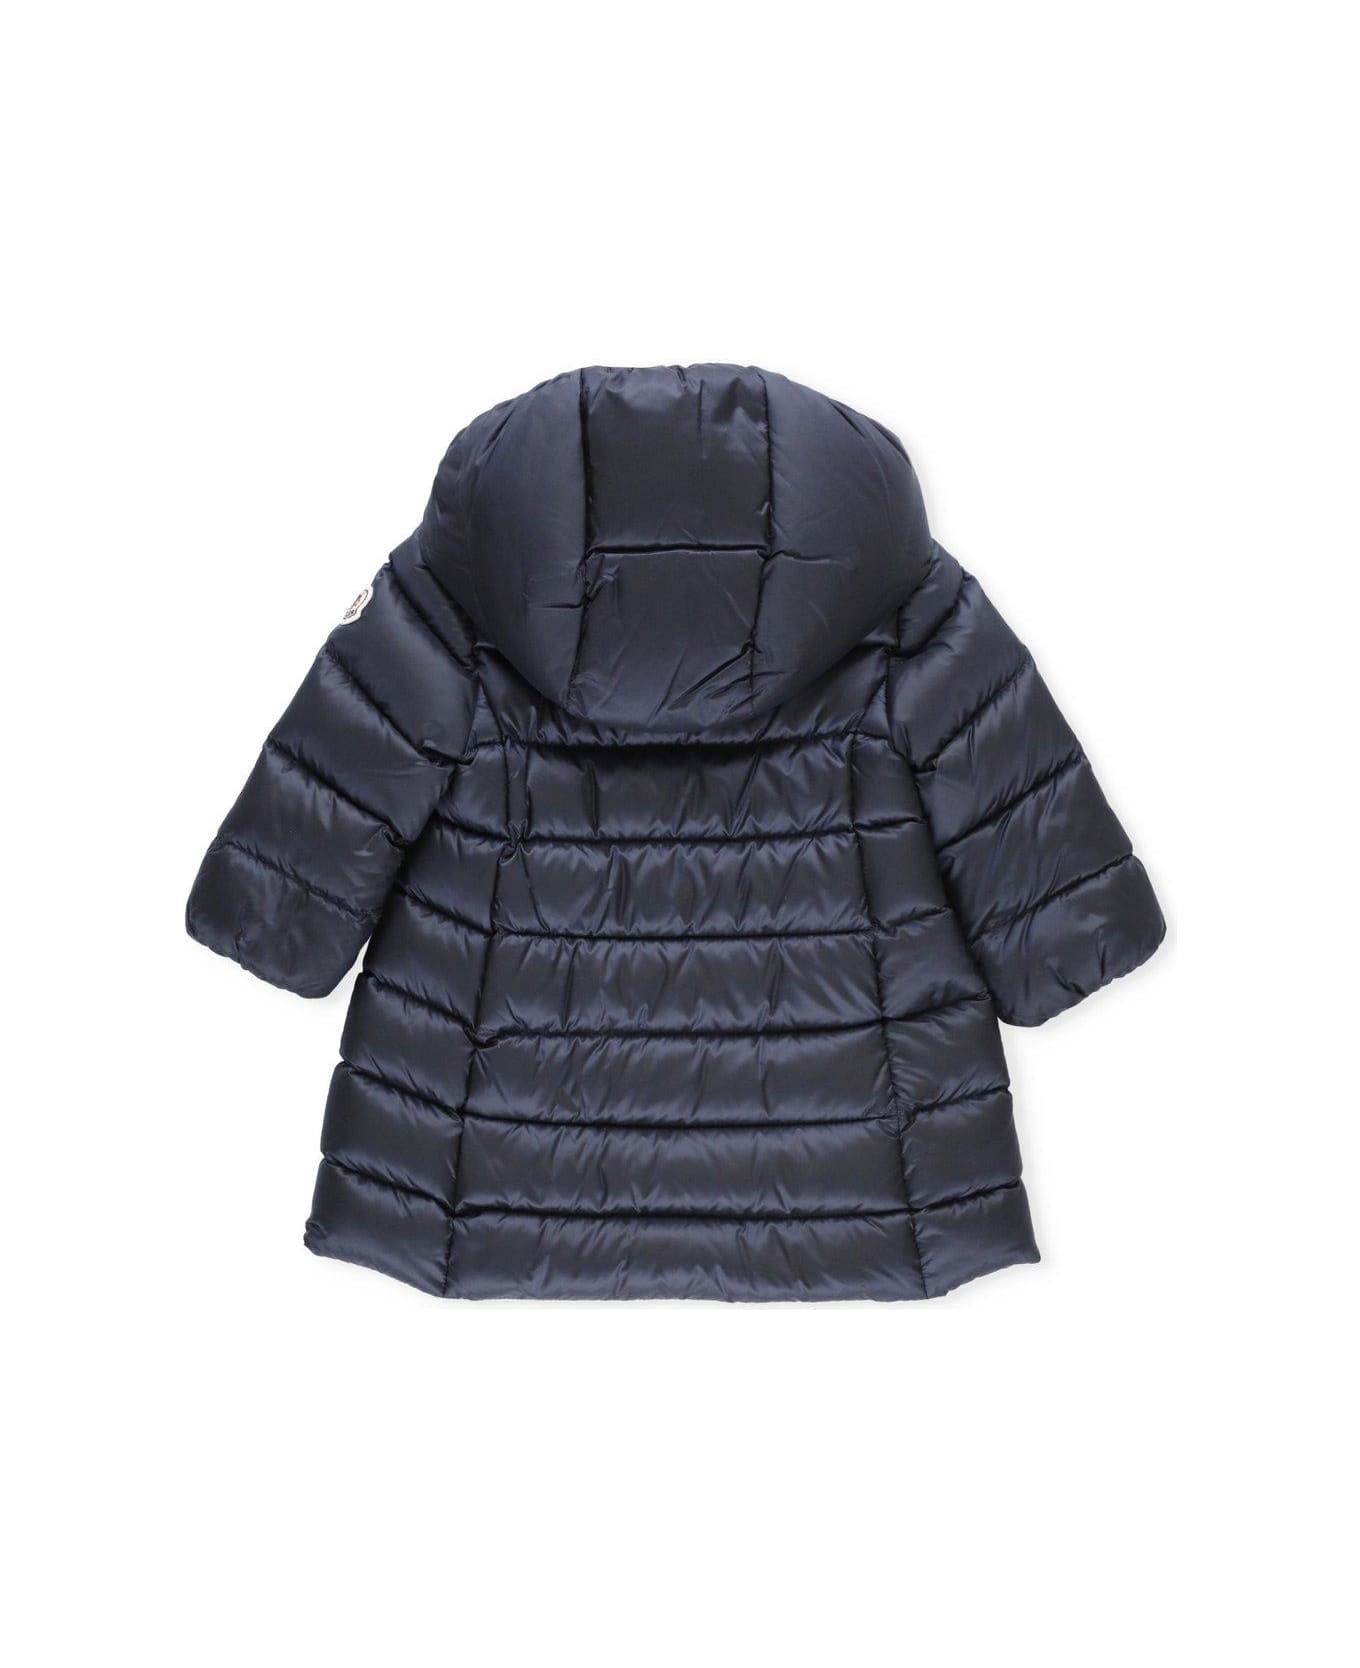 Moncler Hooded Quilted Puffer Coat - NAVY